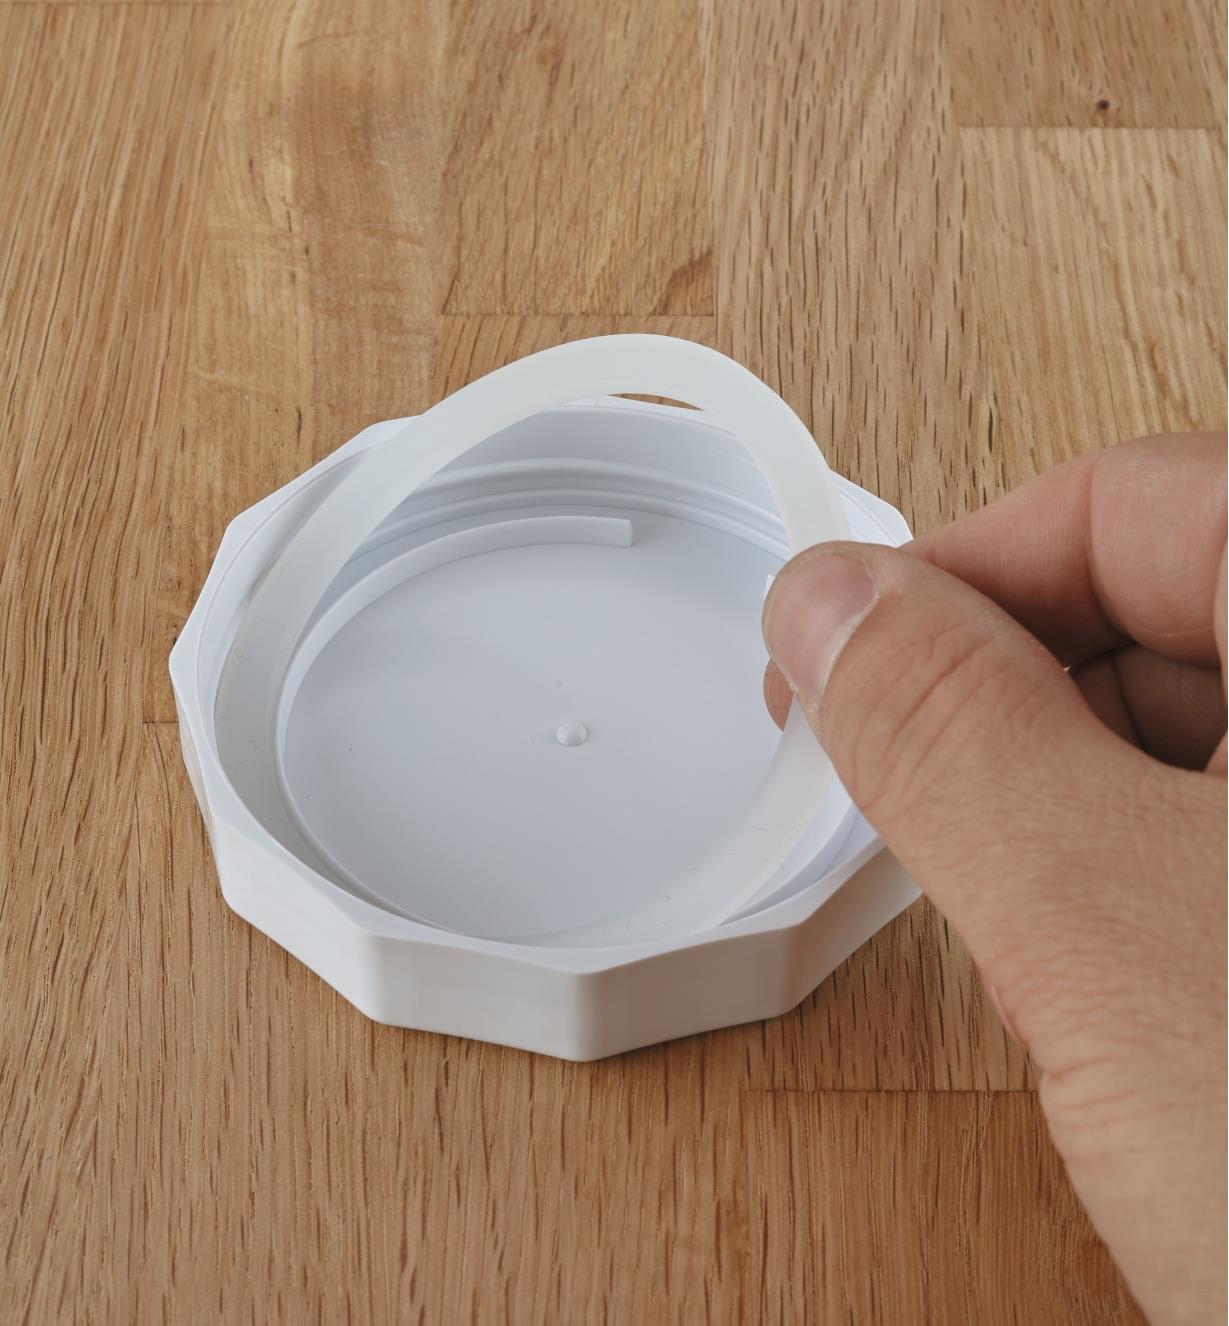 Removing the gasket from a canning jar lid